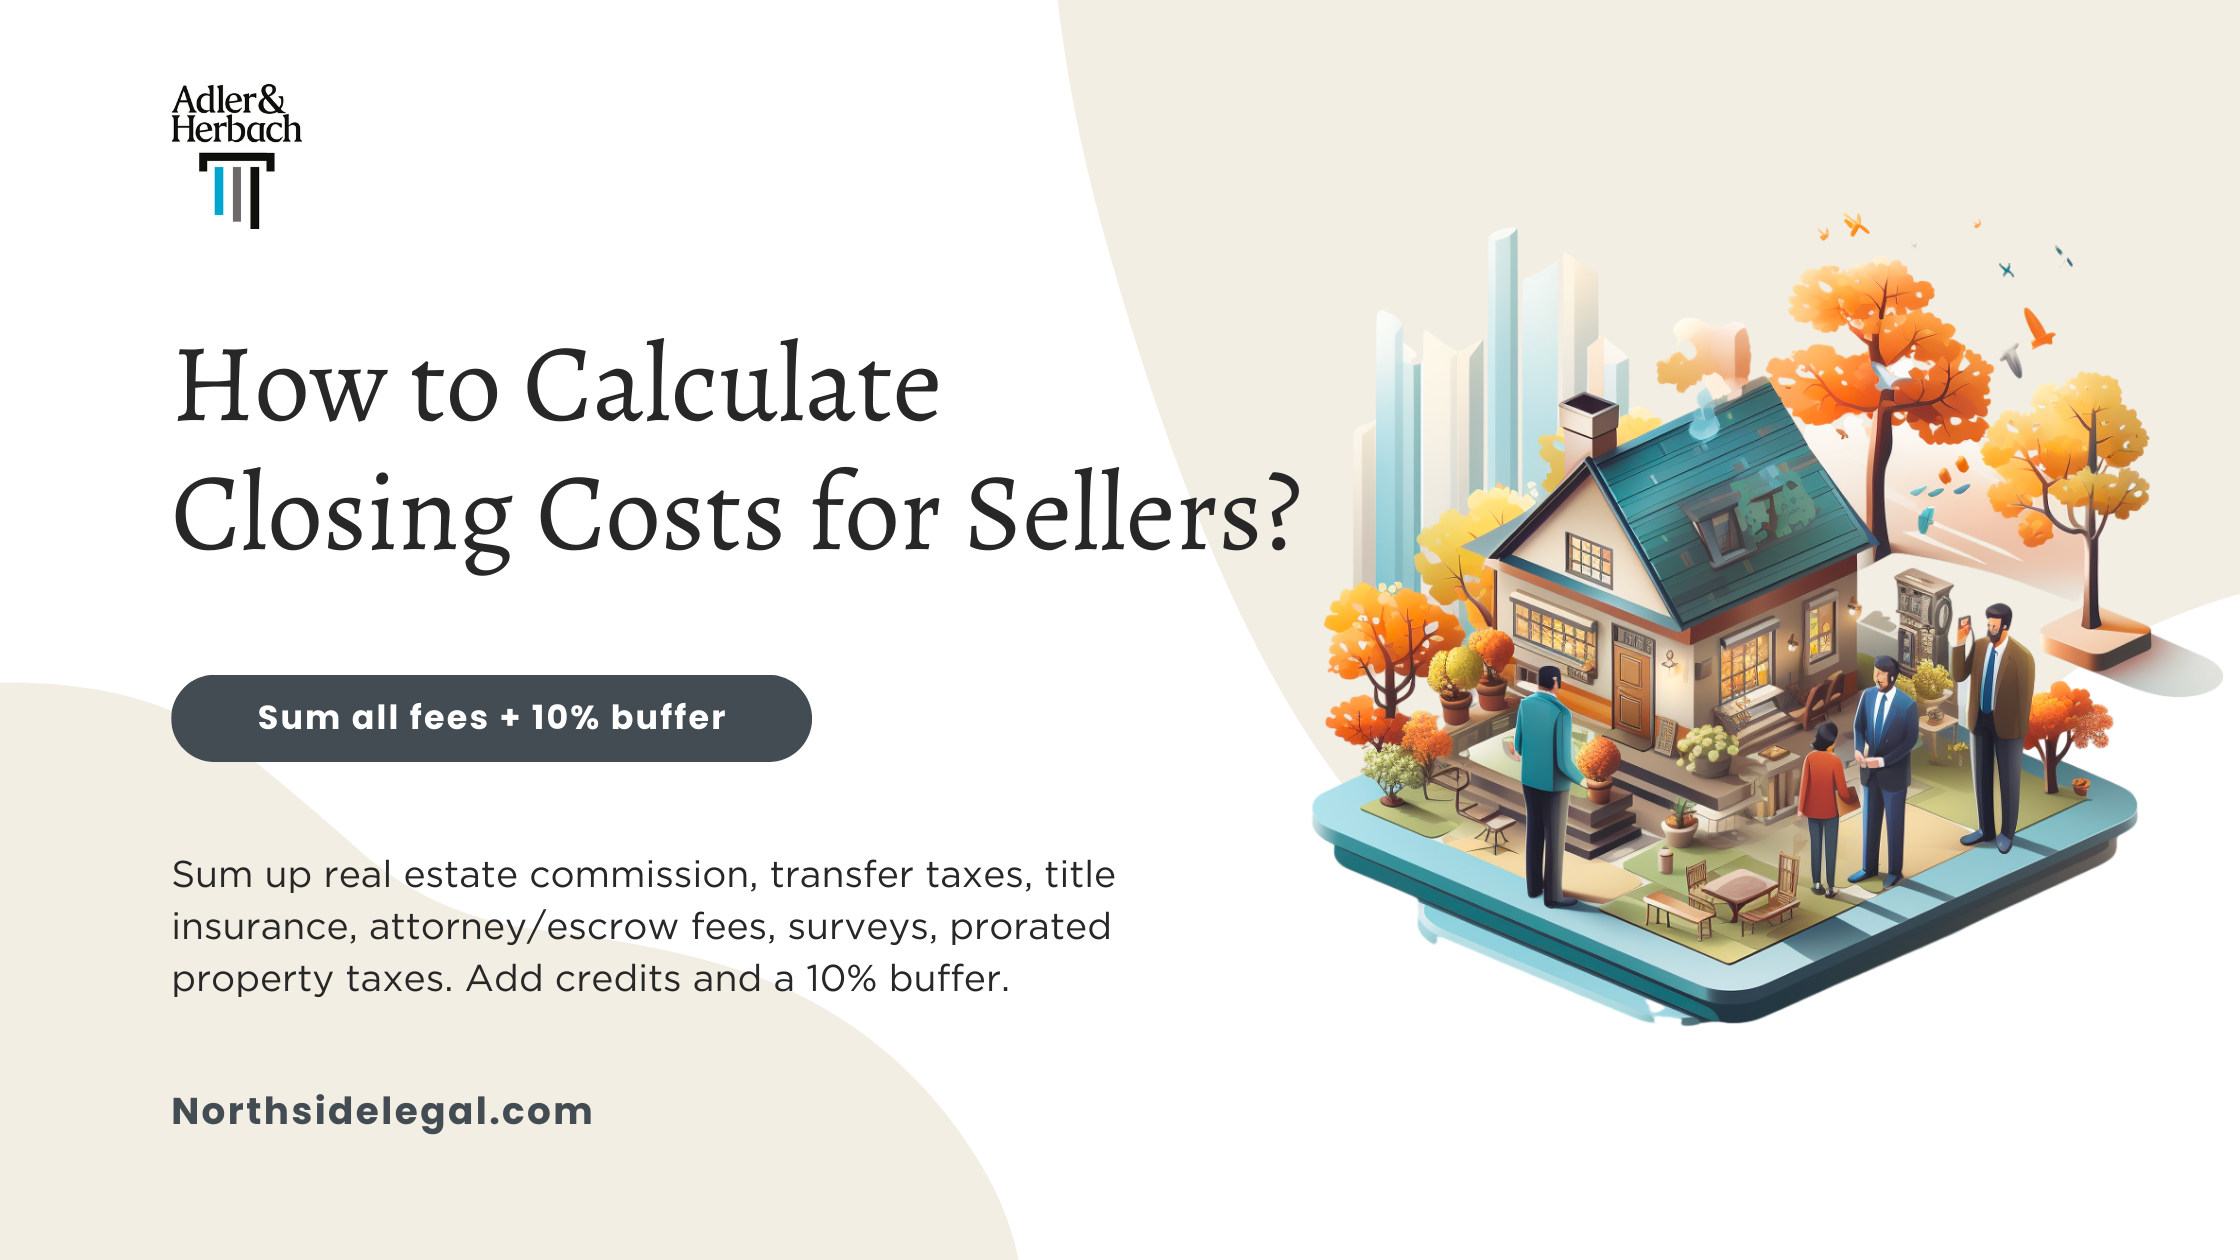 How to Calculate Closing Costs for Sellers?